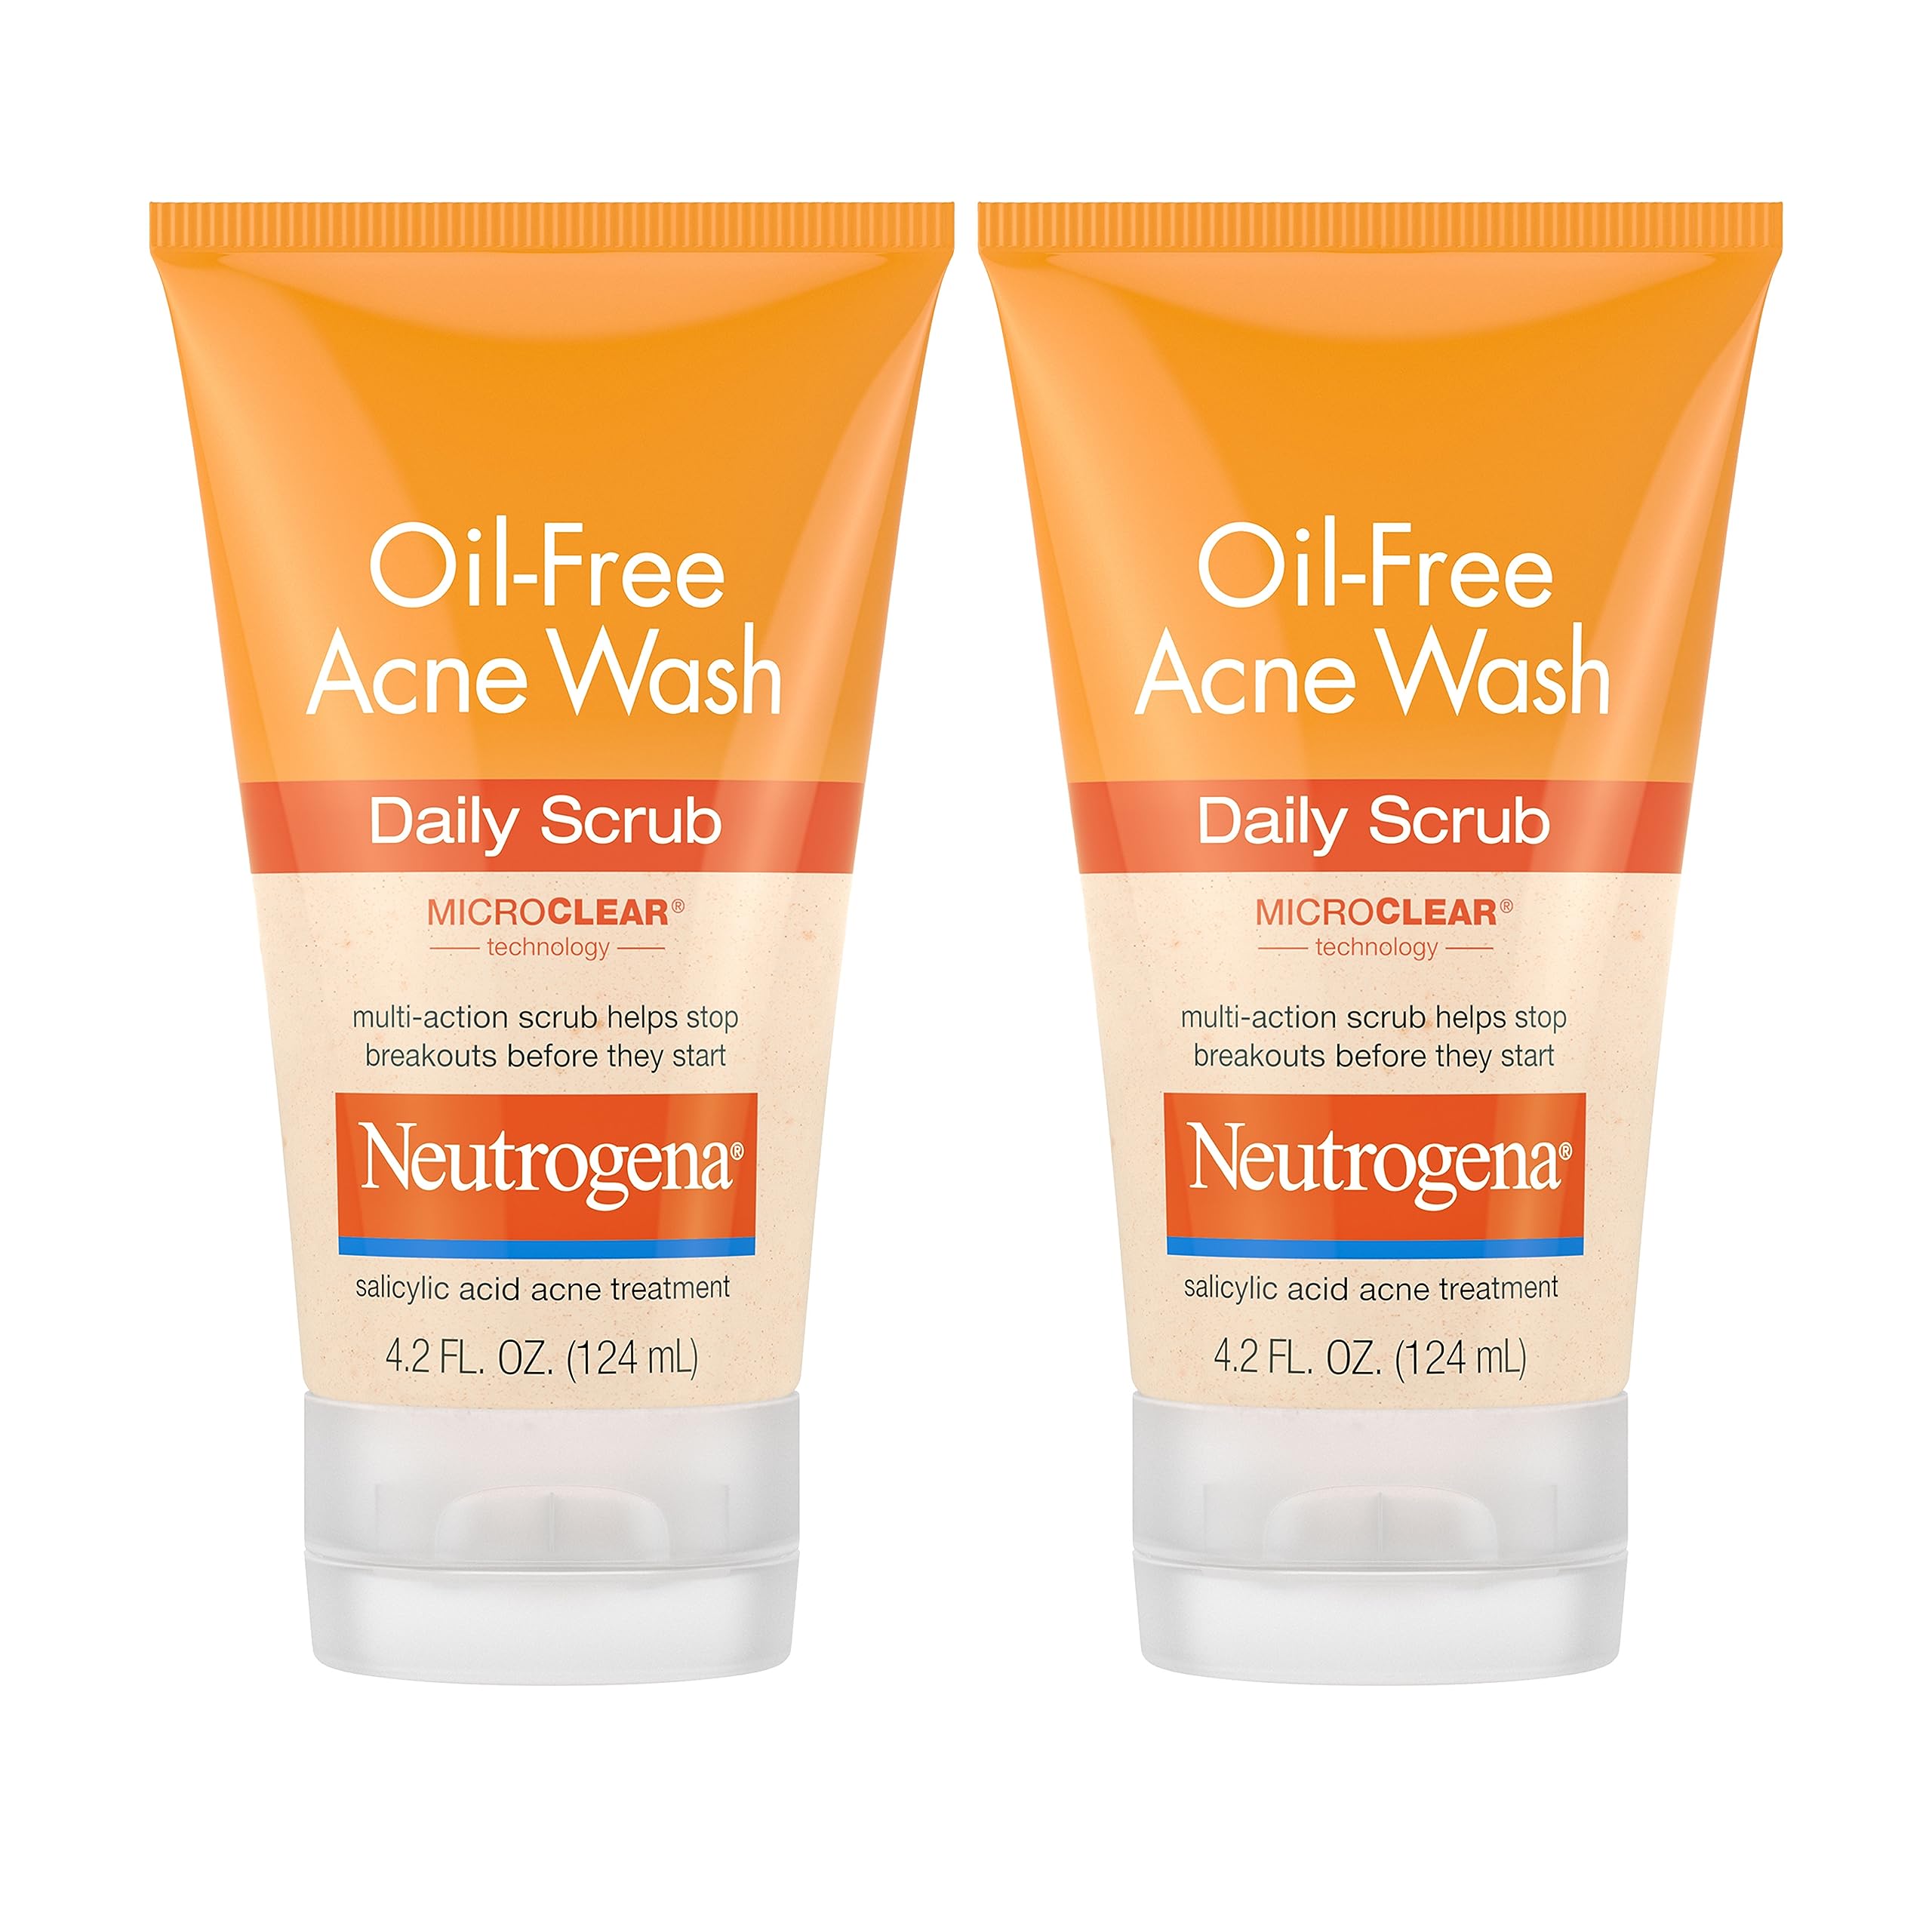 Neutrogena Oil-Free Acne Face Scrub, 2% Salicylic Acid Acne Treatment, Daily Face Wash to help Prevent Breakouts, Exfoliating Facial Cleanser for Acne-Prone Skin, Twin Pack, 2 x 4.2 fl. Oz